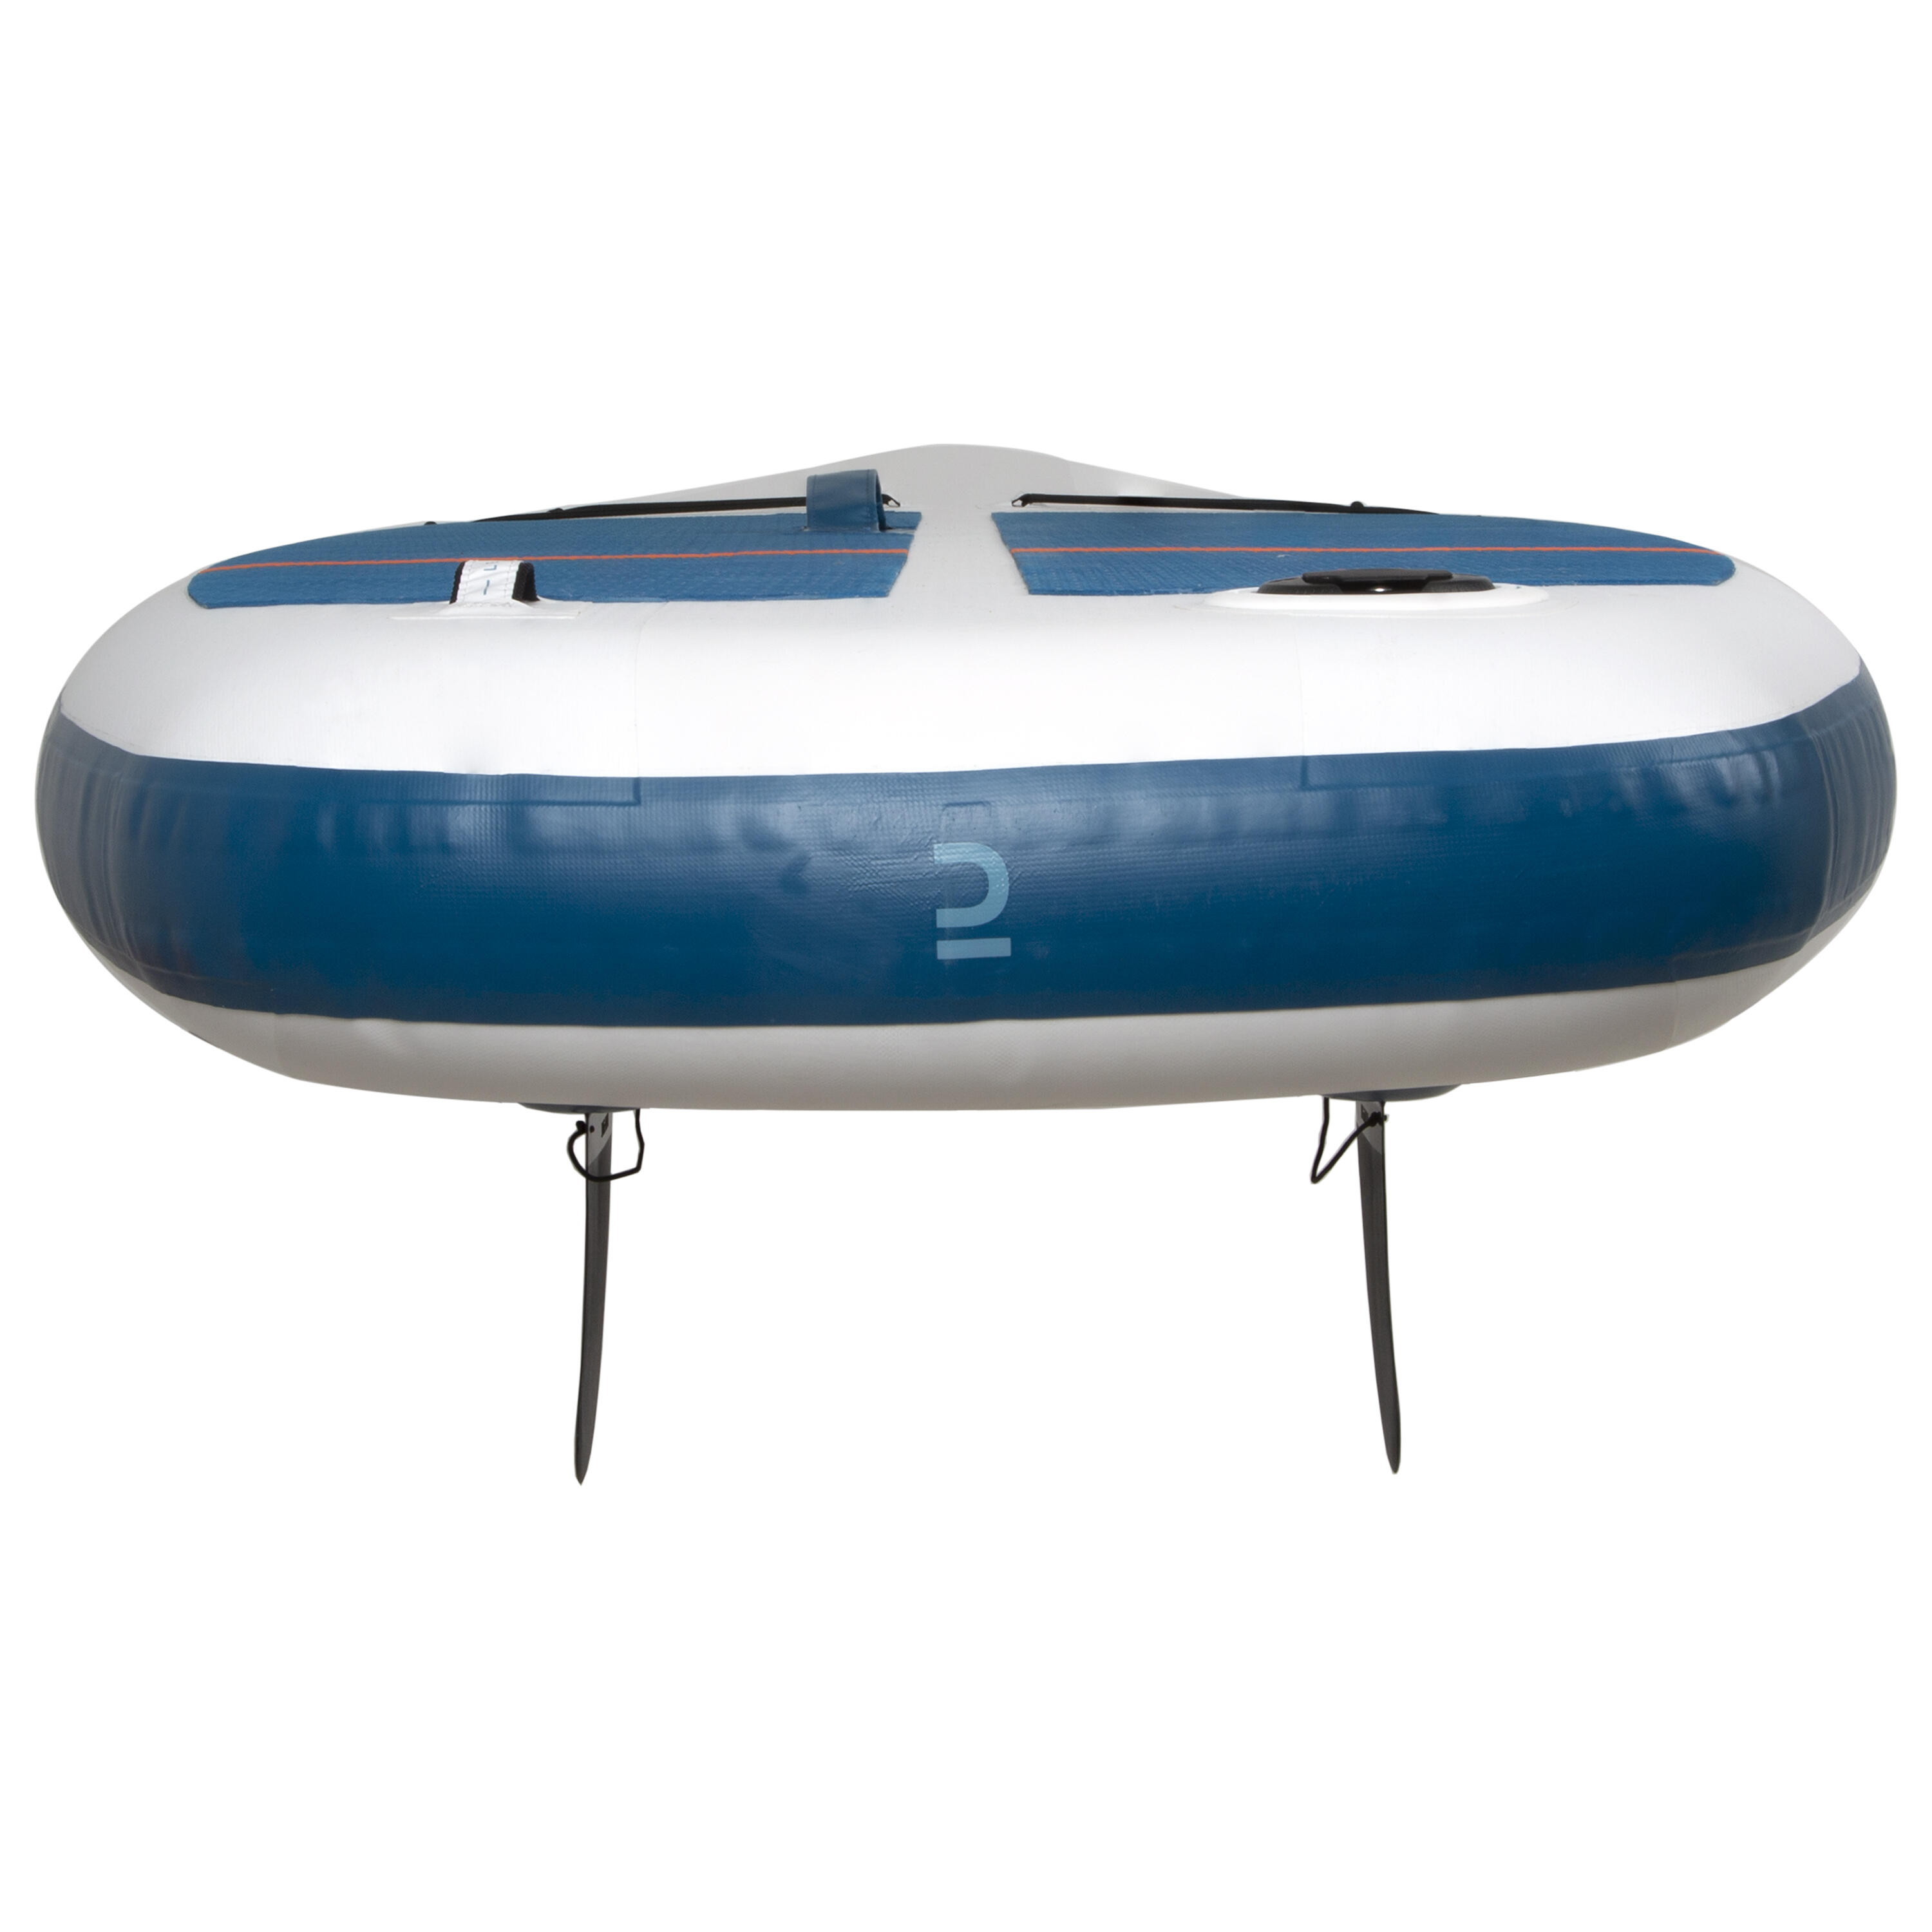 Ultra-compact and stable 10-foot (max. 130 kg) SUP - white and blue 9/29